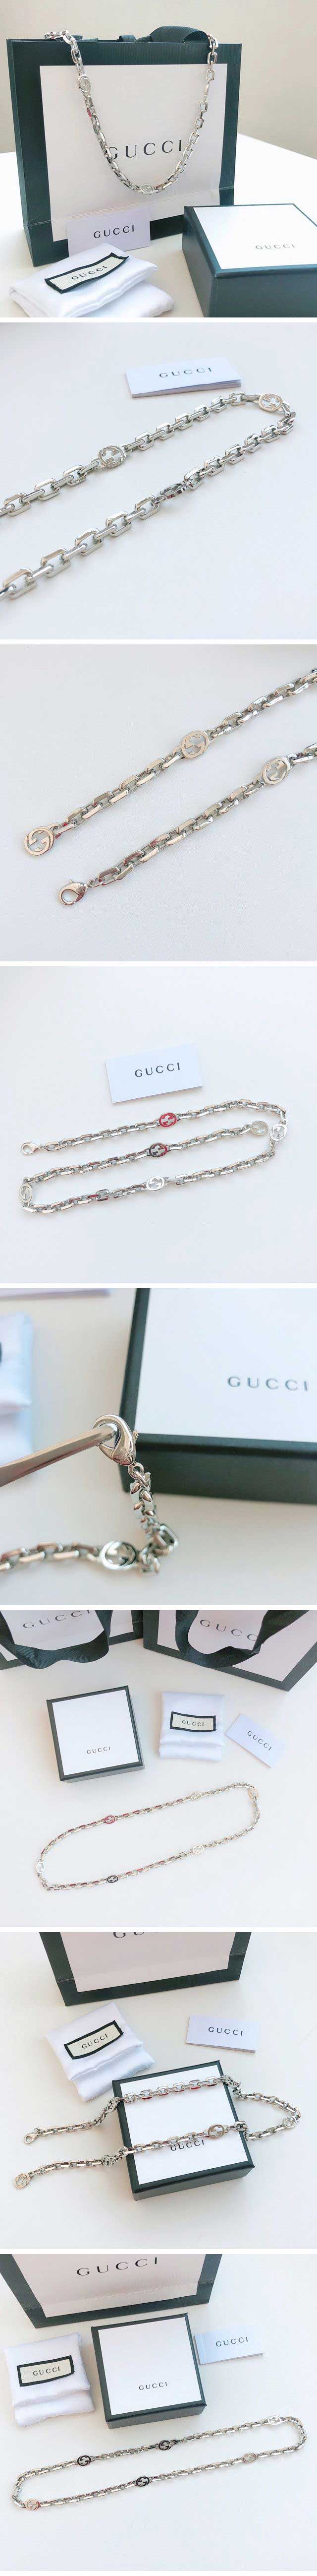 Gucci GG Chain Necklace グッチ GG チェーン ネックレス